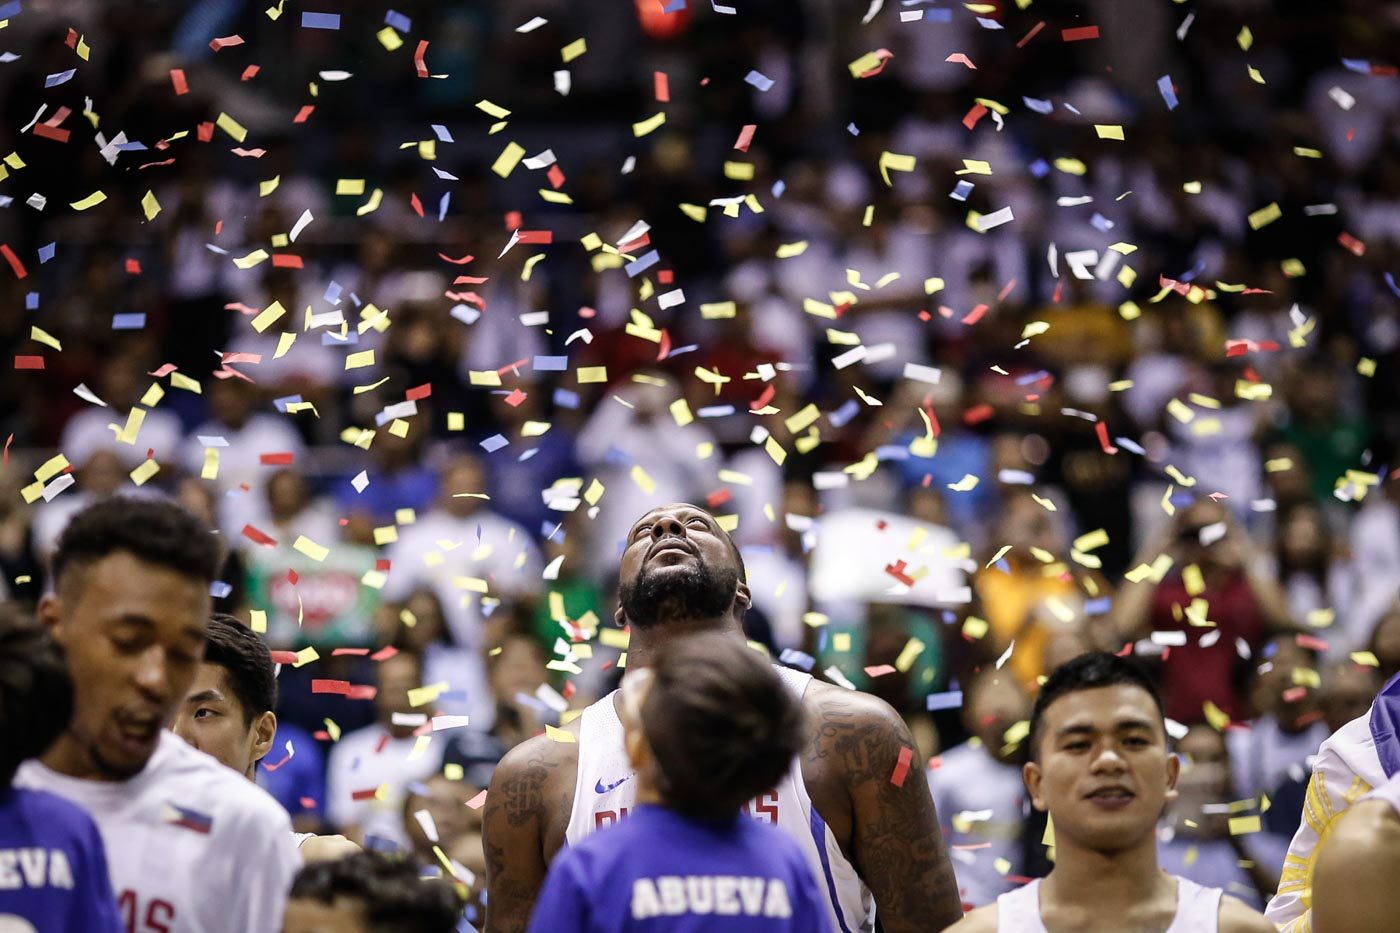 CHAMPS. Gilas Pilipinas lords over Southeast Asian basketball once more after blowing by Indonesia, 97-64, to win gold in the 2017 SEABA Championship on May 18, 2017 at the Smart Araneta Coliseum. Photo by Josh Albelda/Rappler  